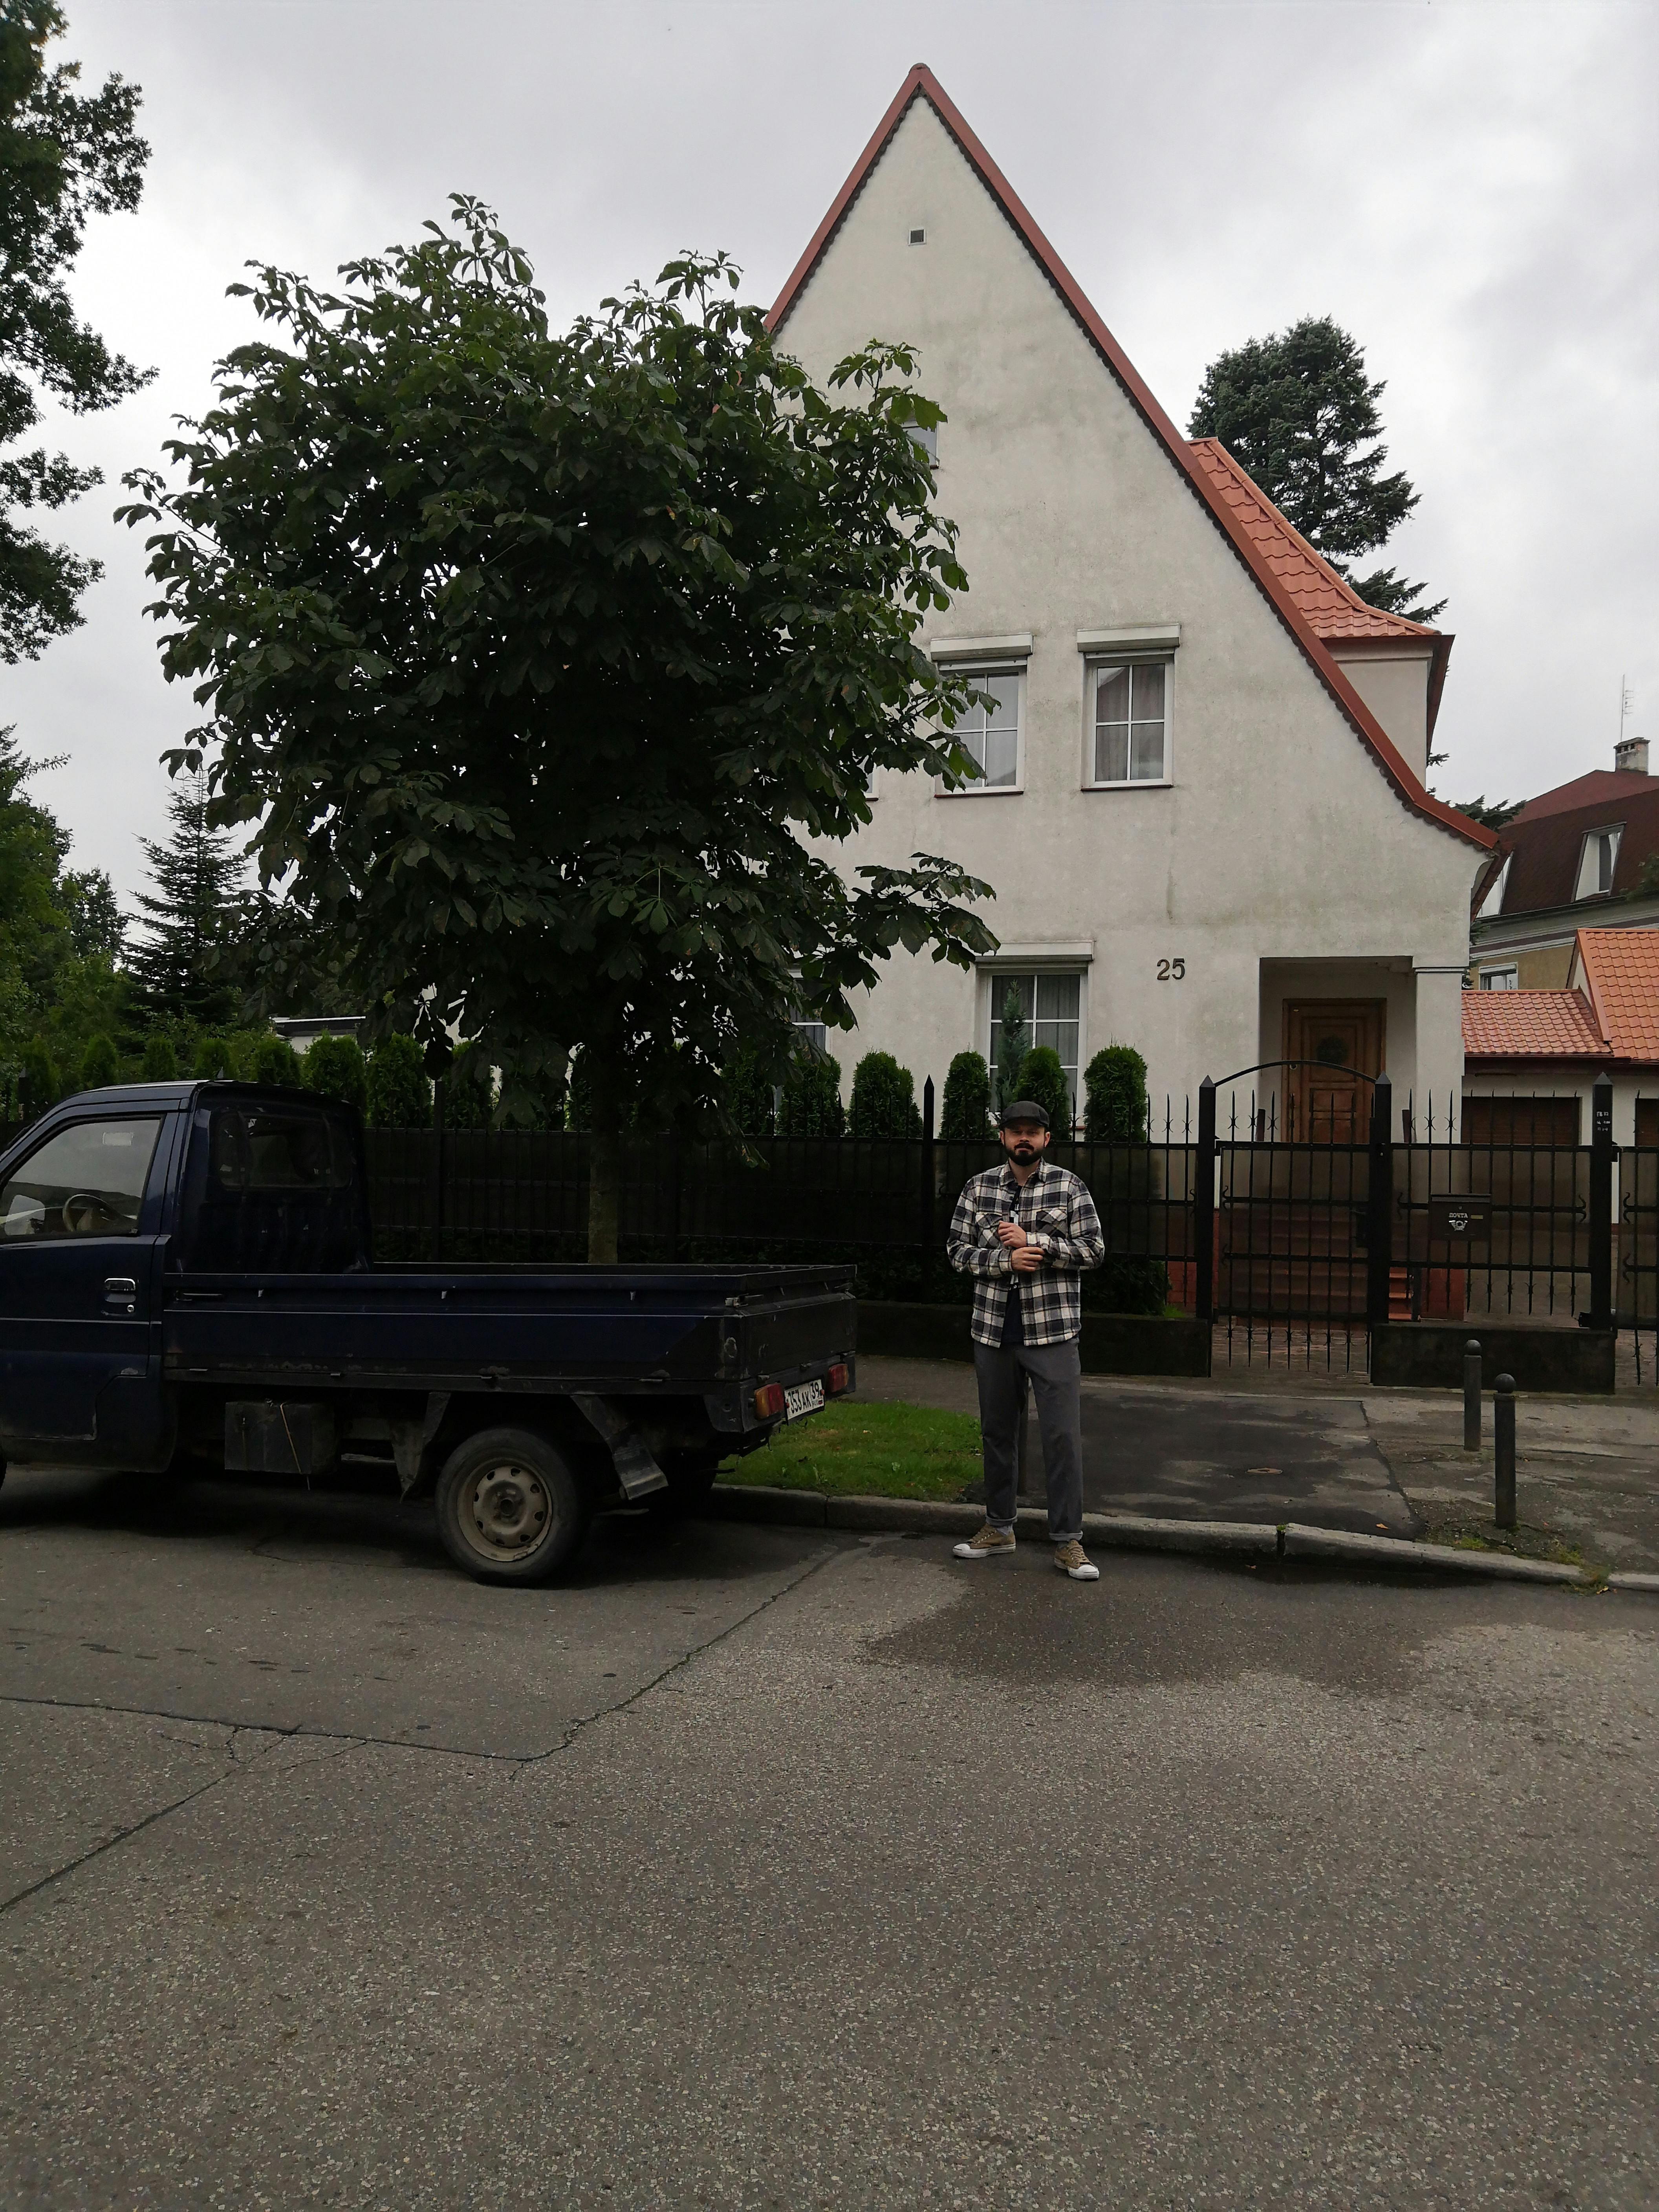 Strange man standing next to his car near a house | Source: Pexels